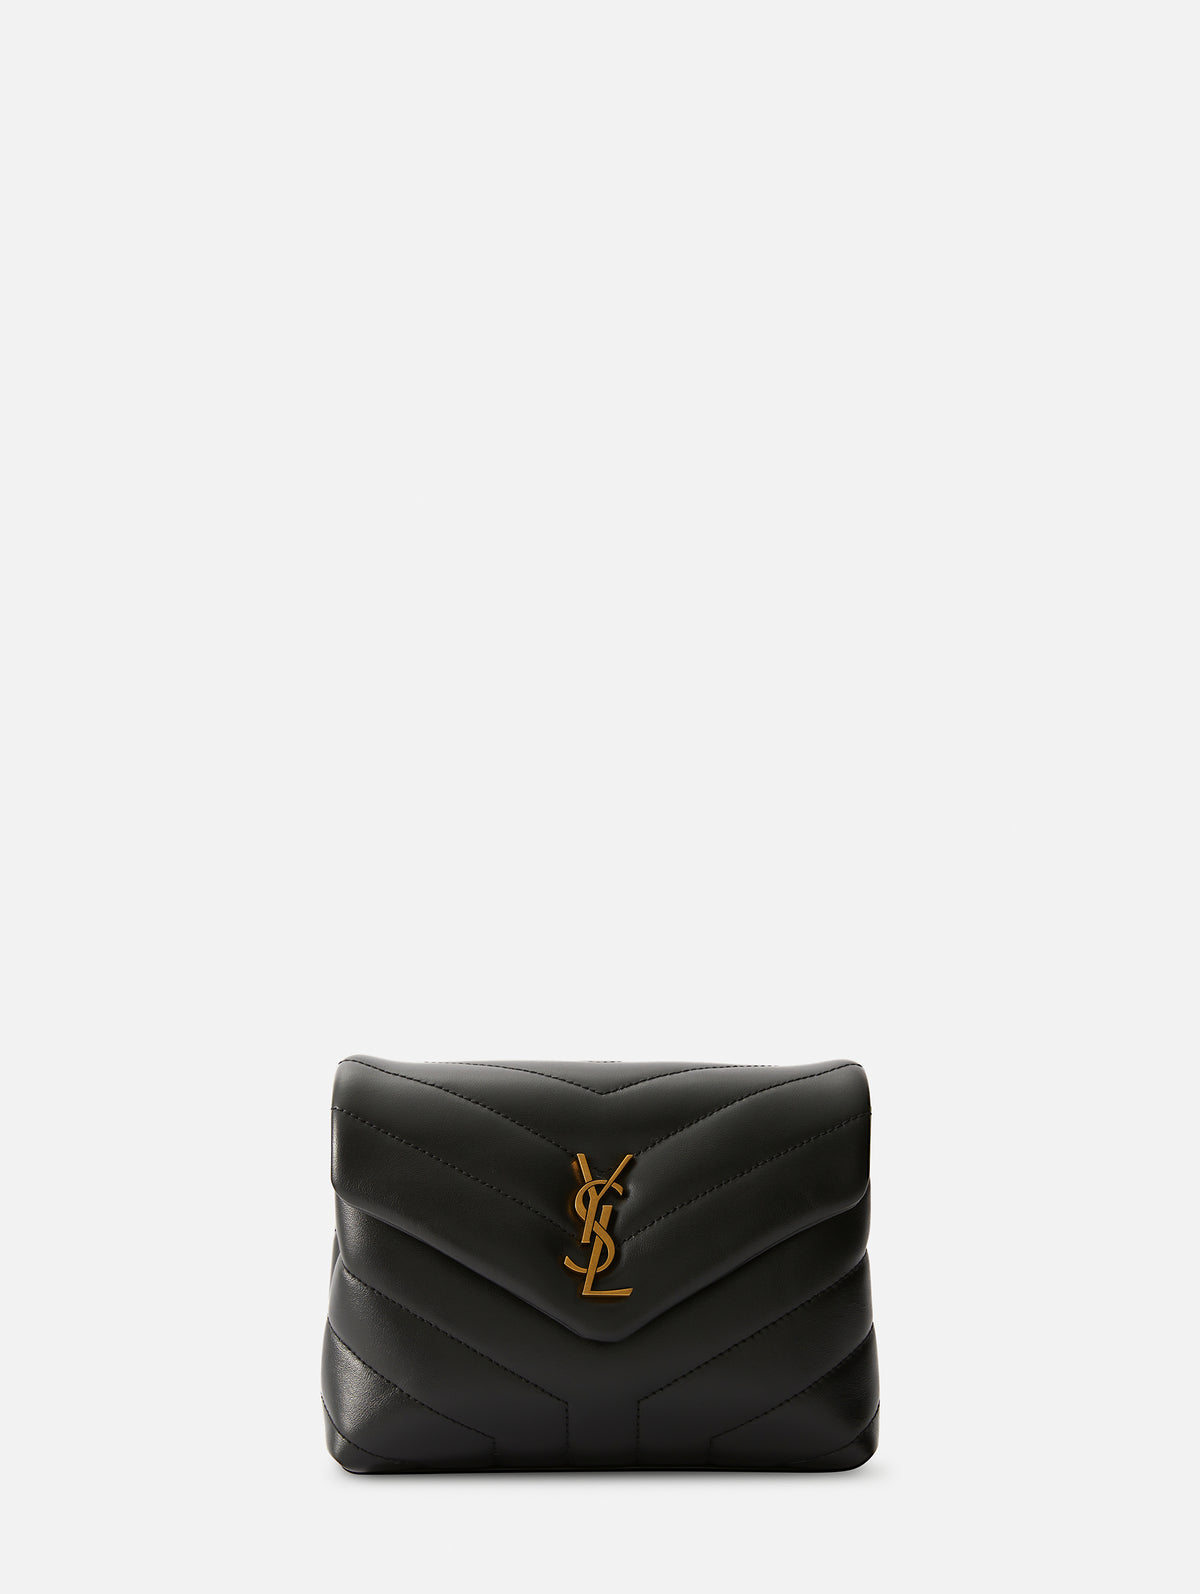 YSL Saint Laurent Camera Bag - FROM LUXE WITH LOVE